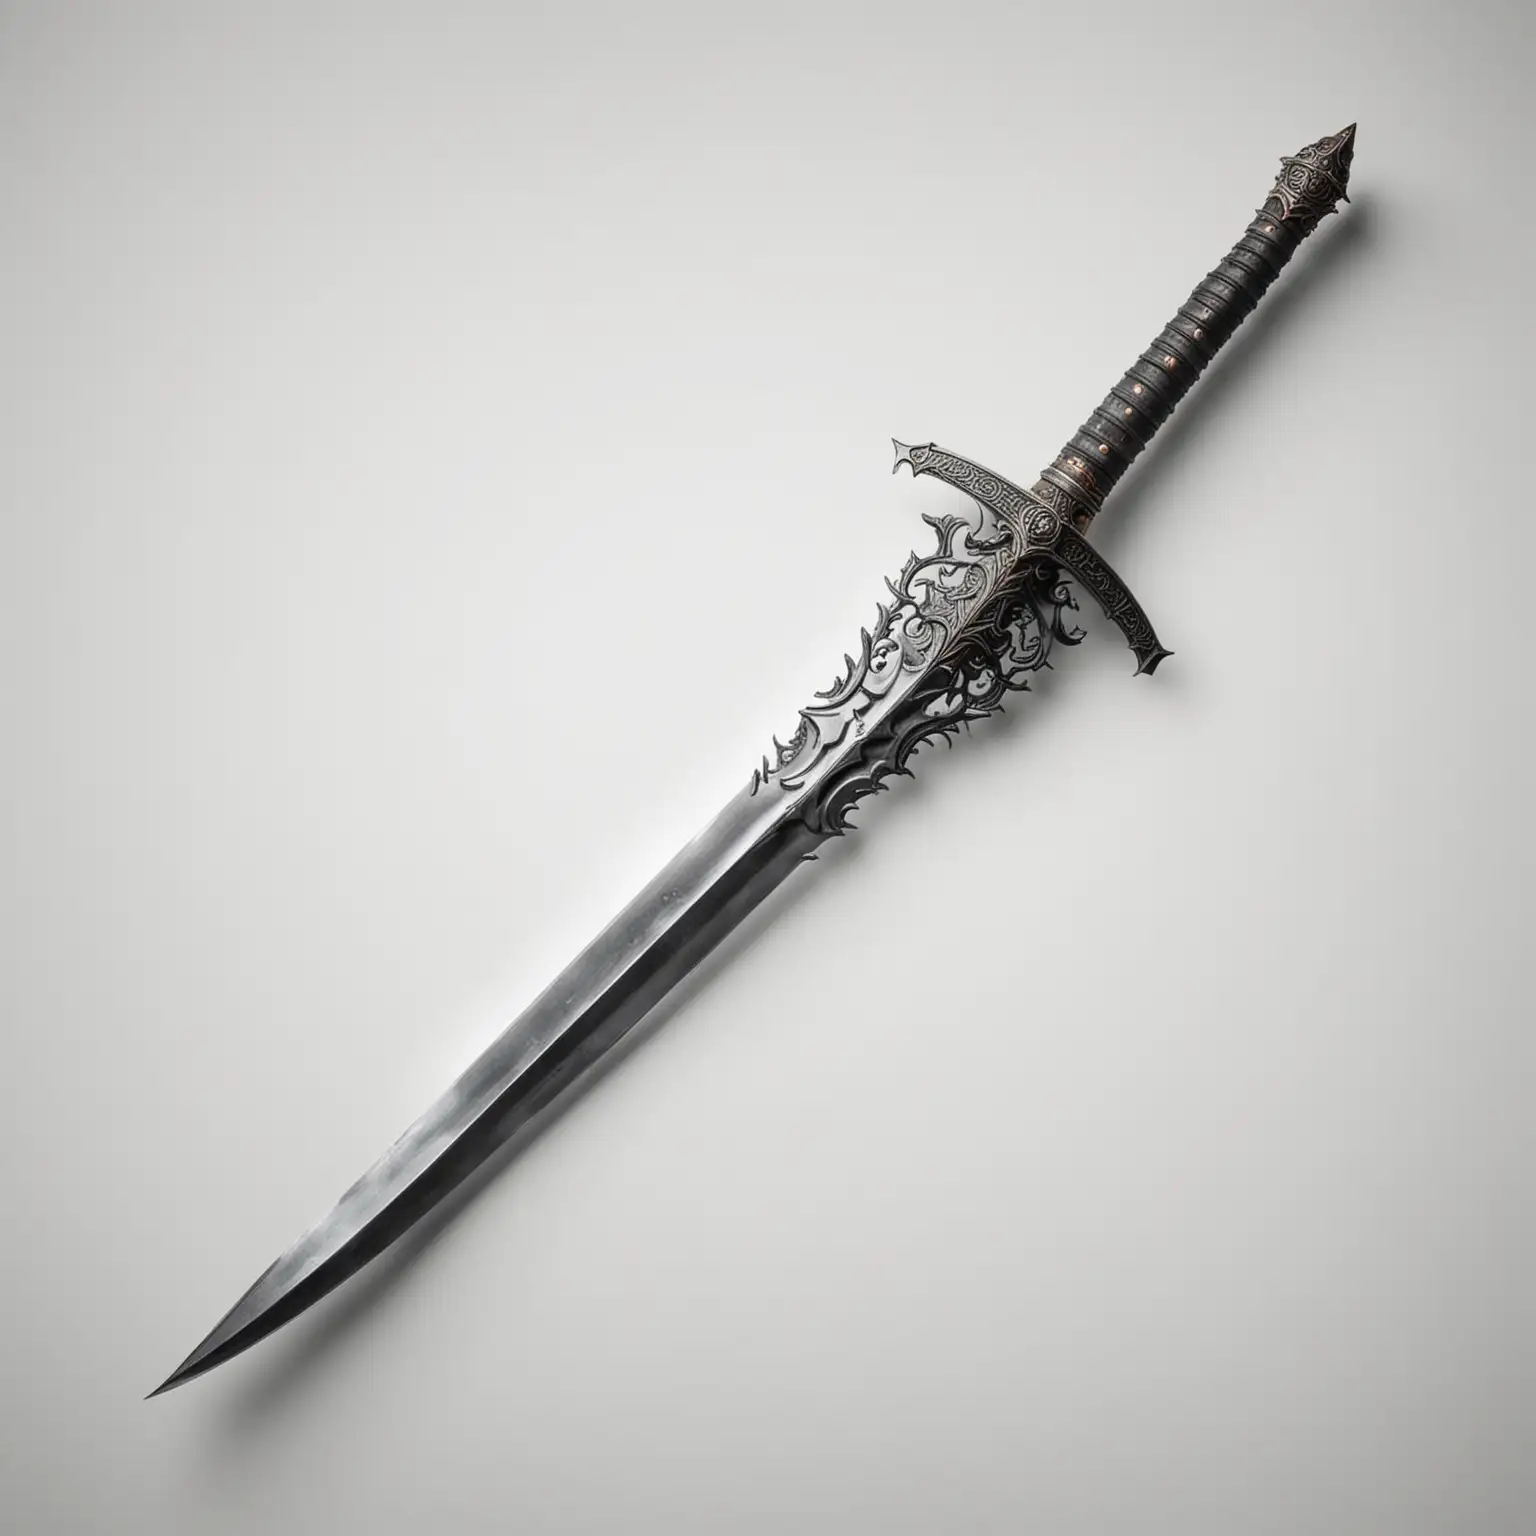 HighQuality-Wide-Blade-Sword-on-White-Background